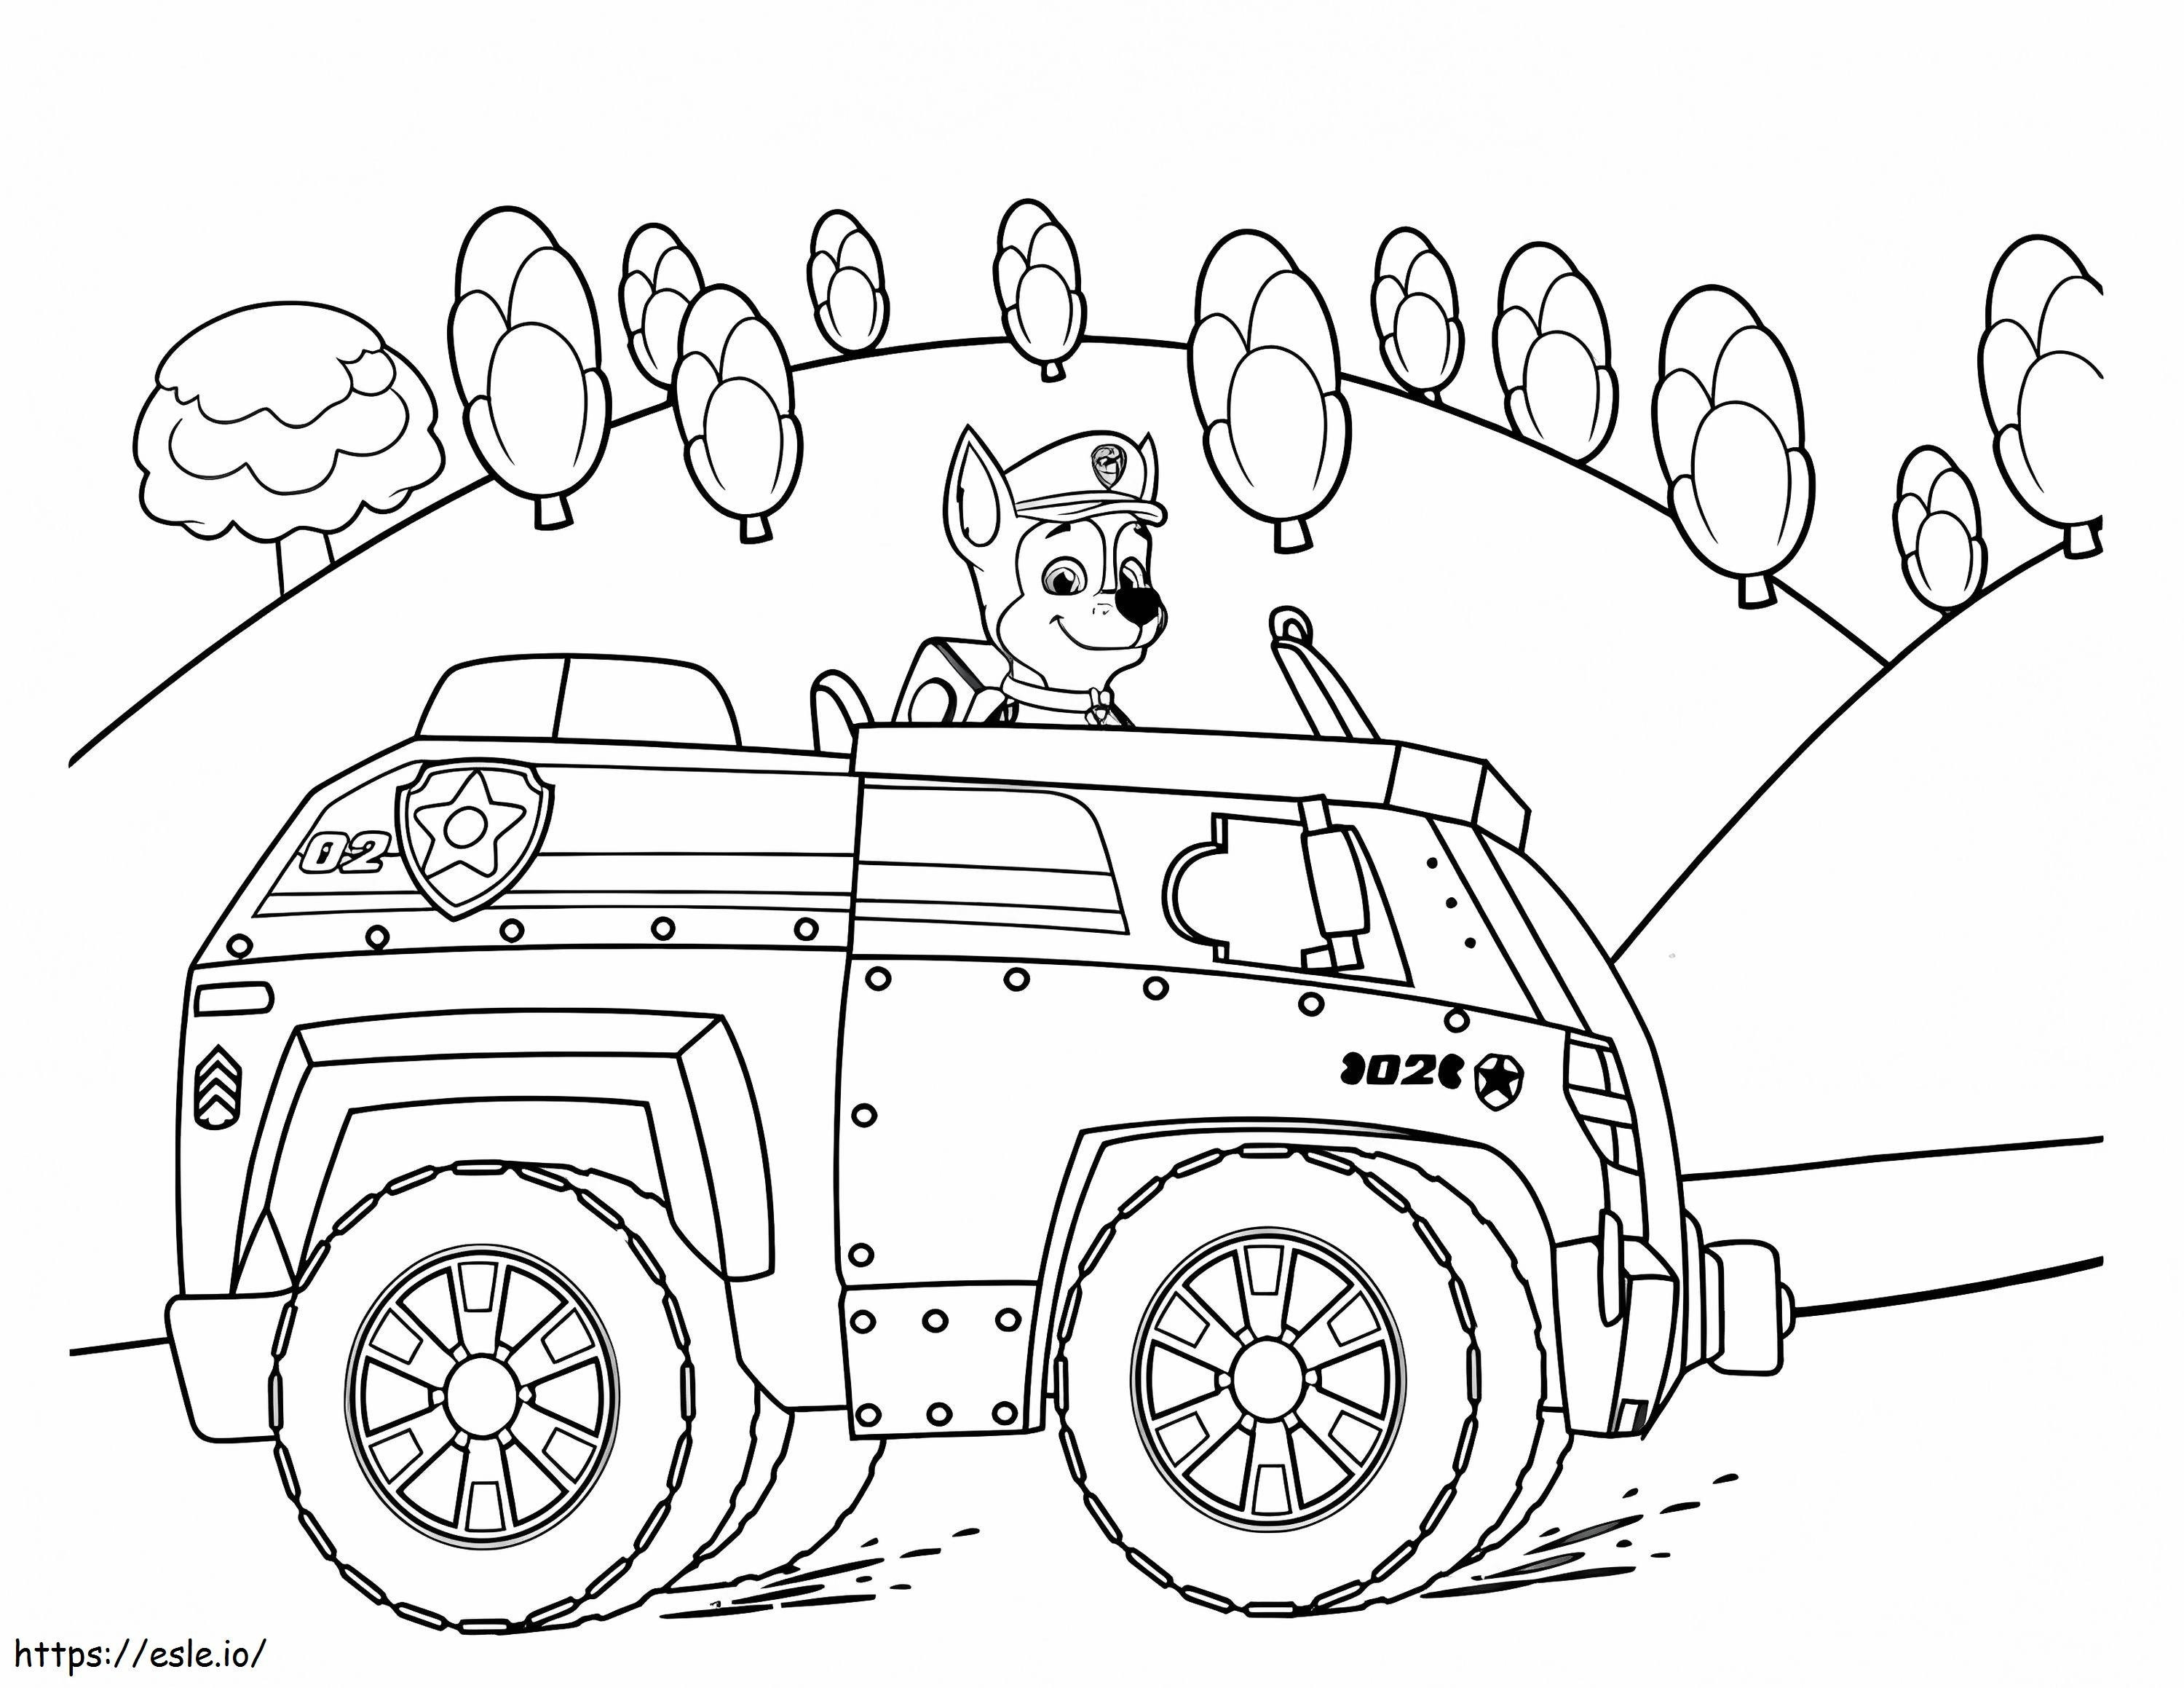 Chase Paw Patrol 14 coloring page